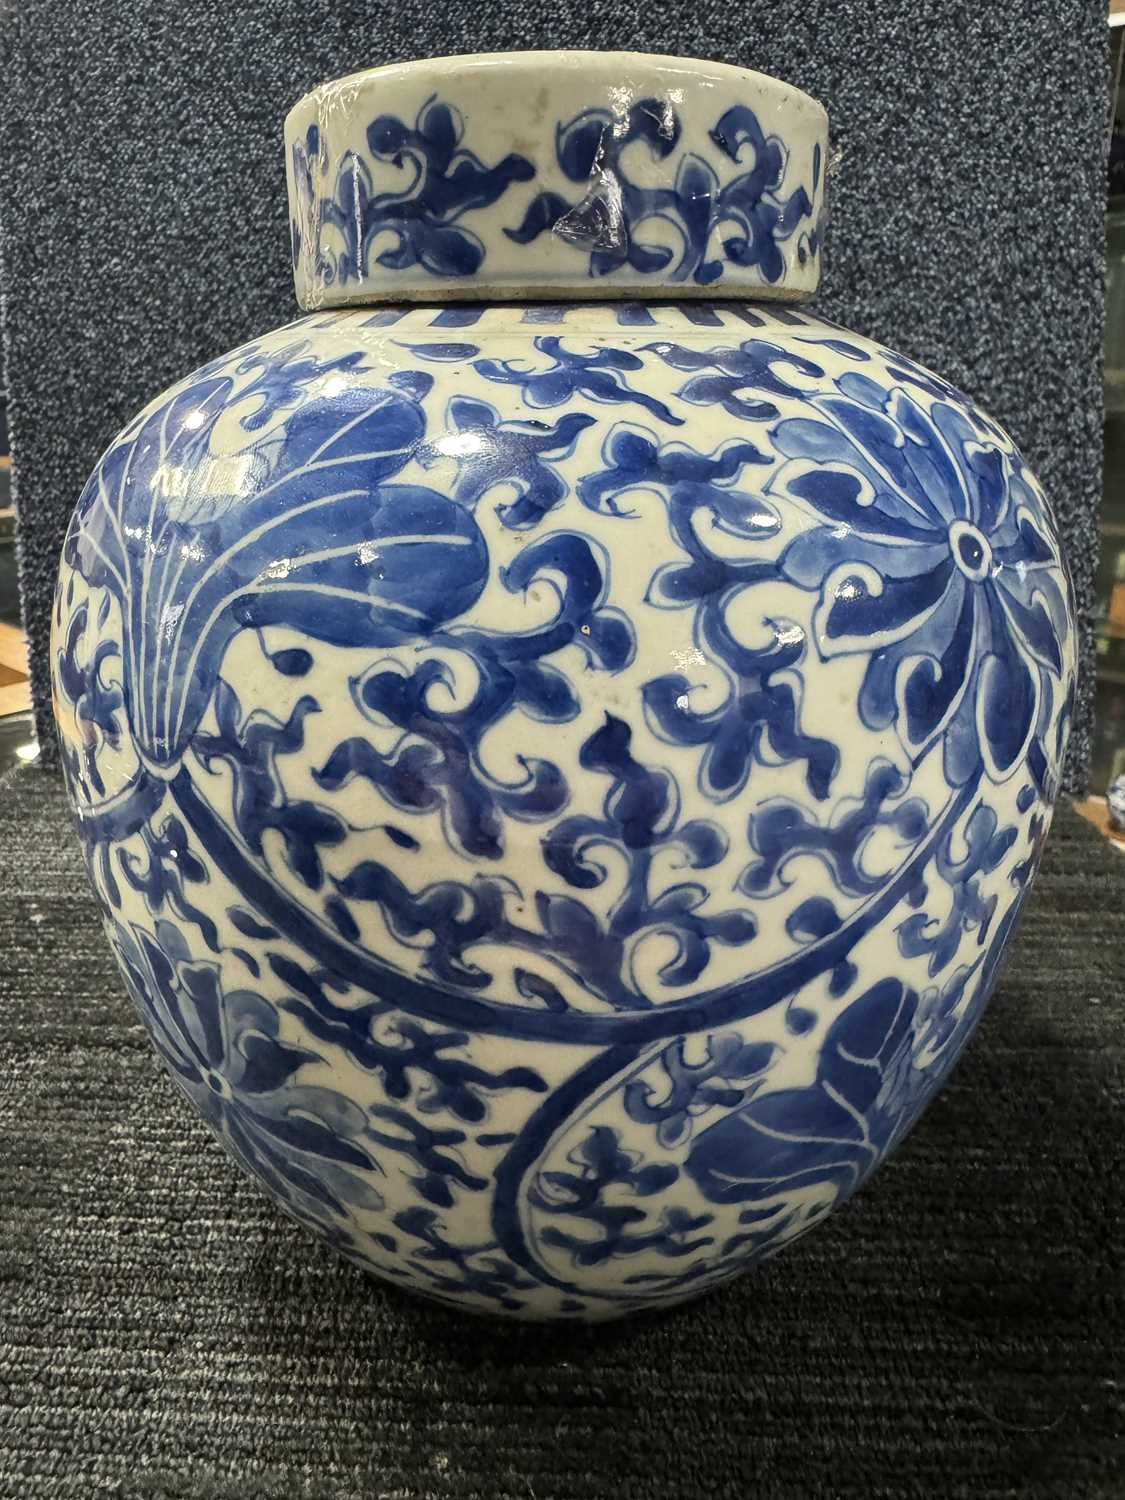 LATE 19TH/EARLY 20TH CENTURY CHINESE BLUE AND WHITE LIDDED GINGER JAR, GUANGXU PERIOD (1875-1908) - Image 4 of 9